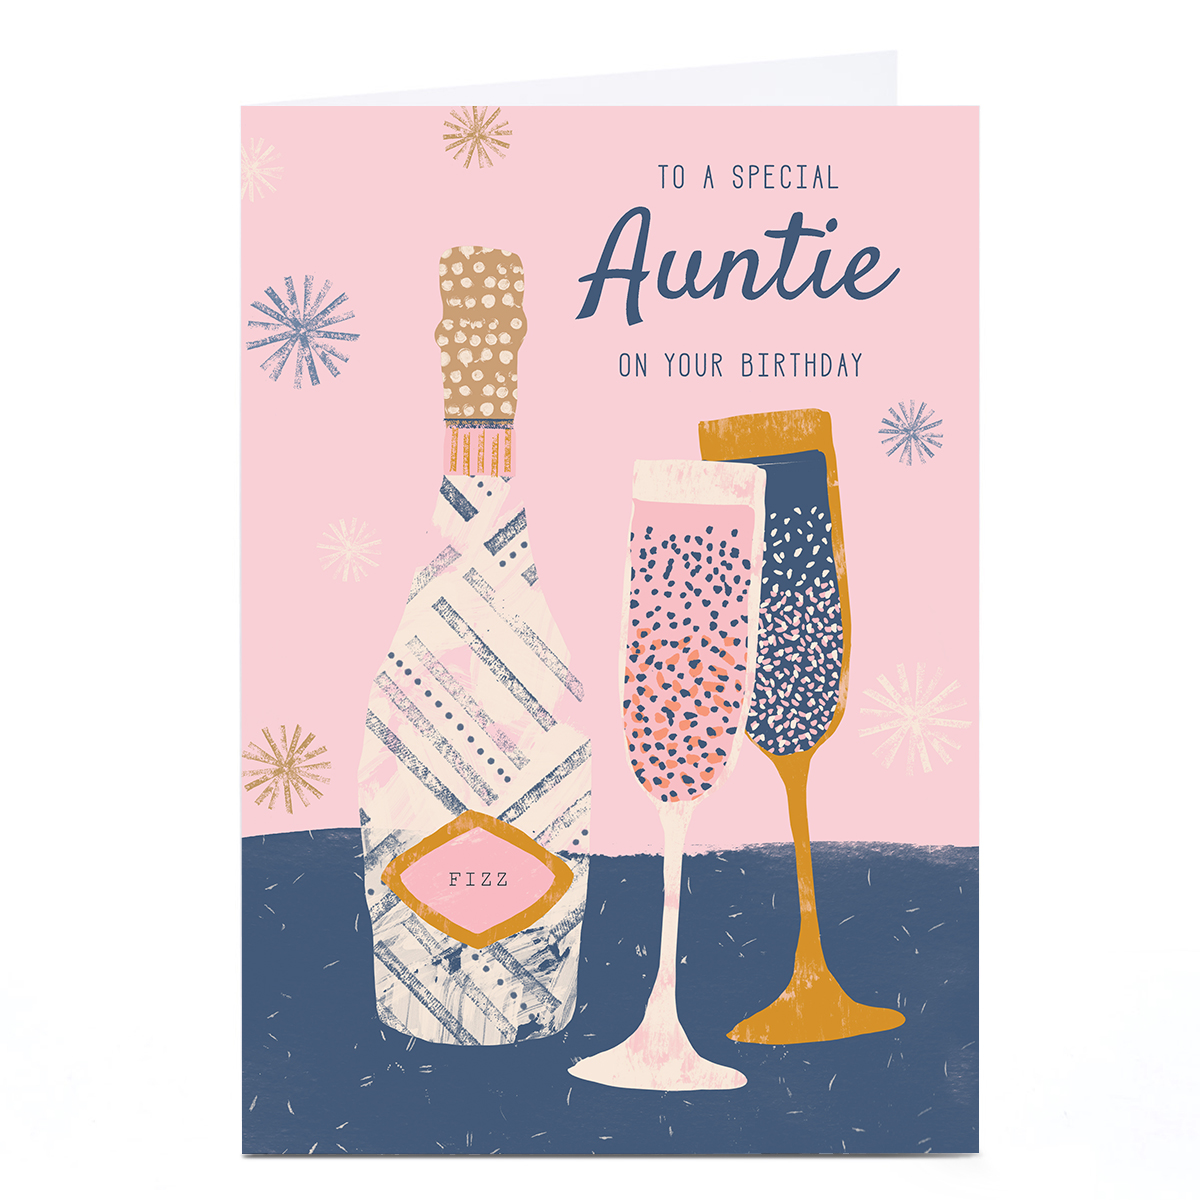 Personalised Rebecca Prinn Birthday Card - Champagne Flutes, Auntie